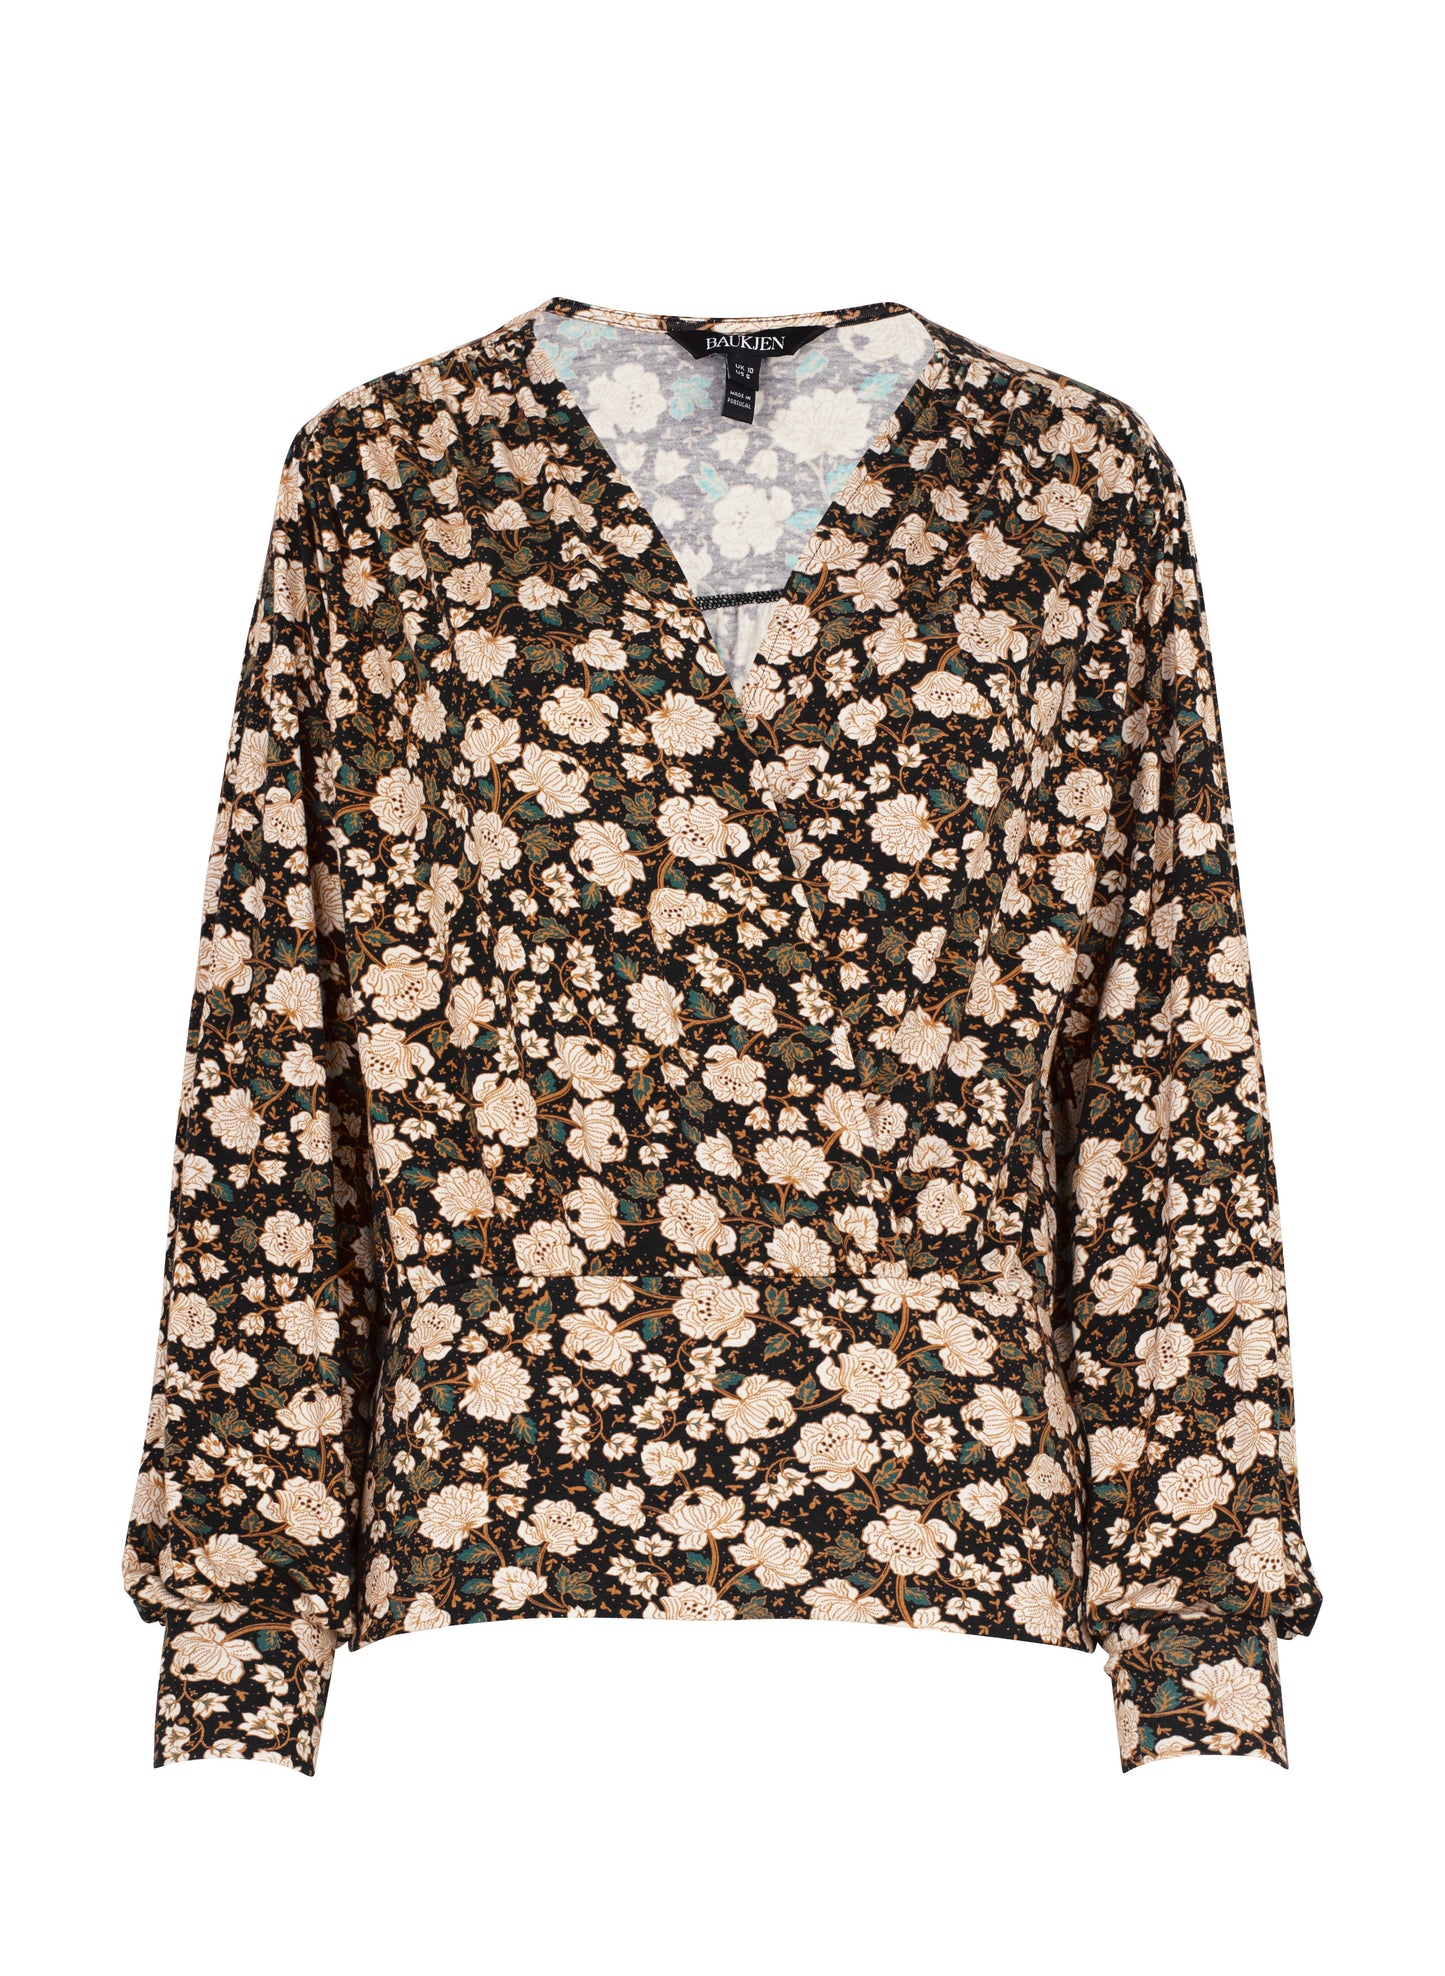 Pre-Loved Arabella Wrap Top with LENZING™ ECOVERO™